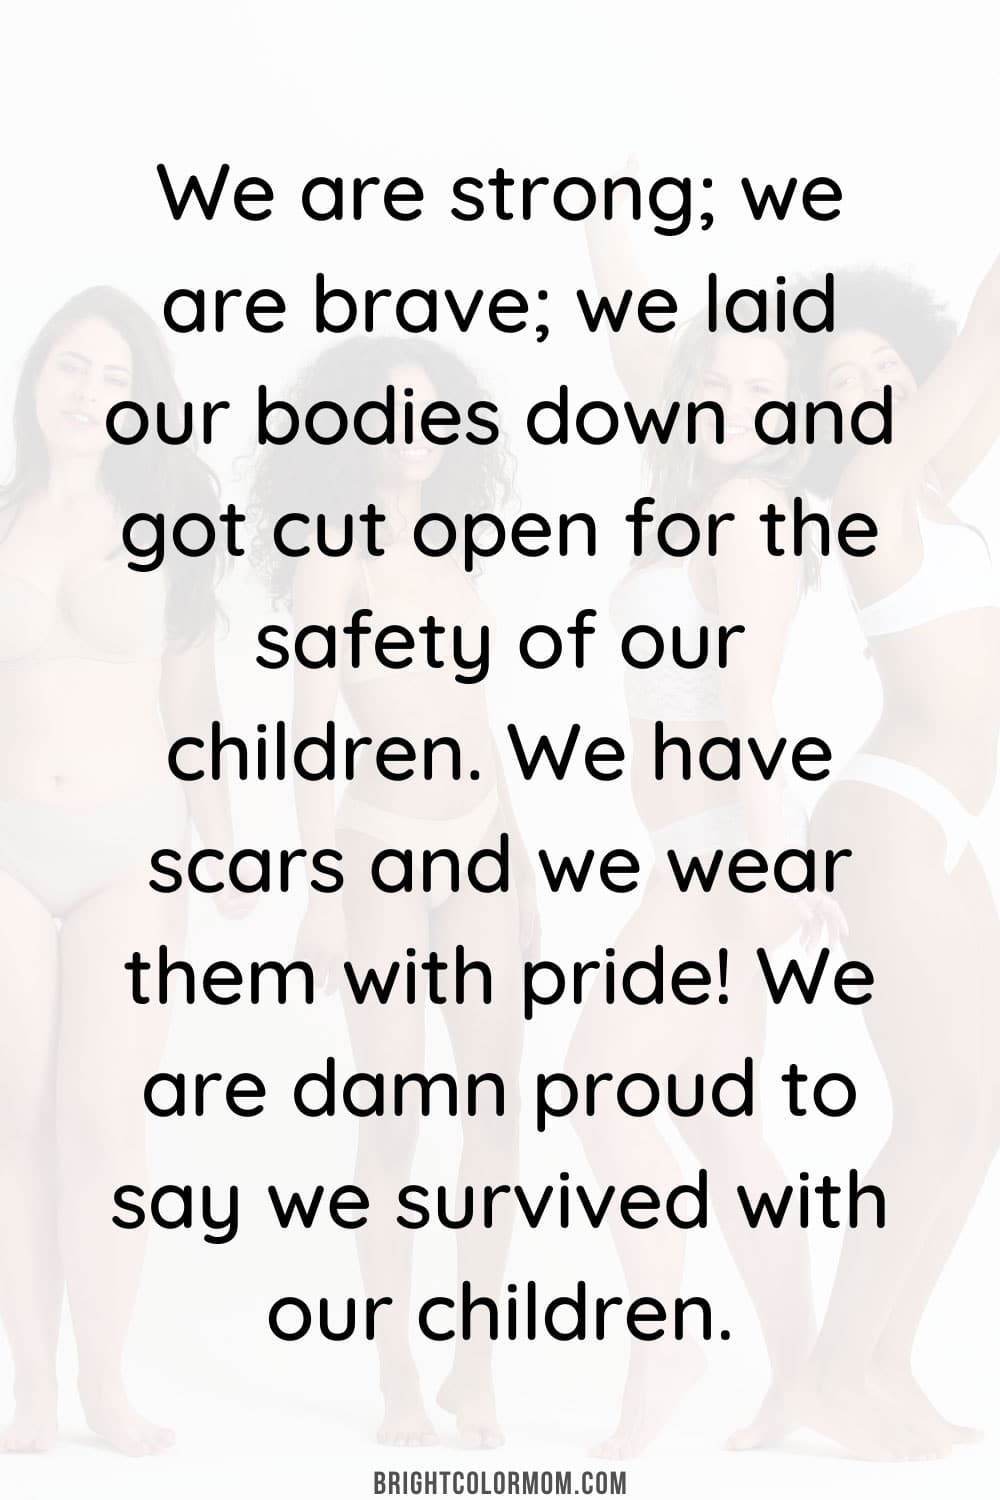 We are strong; we are brave; we laid our bodies down and got cut open for the safety of our children. We have scars and we wear them with pride! We are damn proud to say we survived with our children.